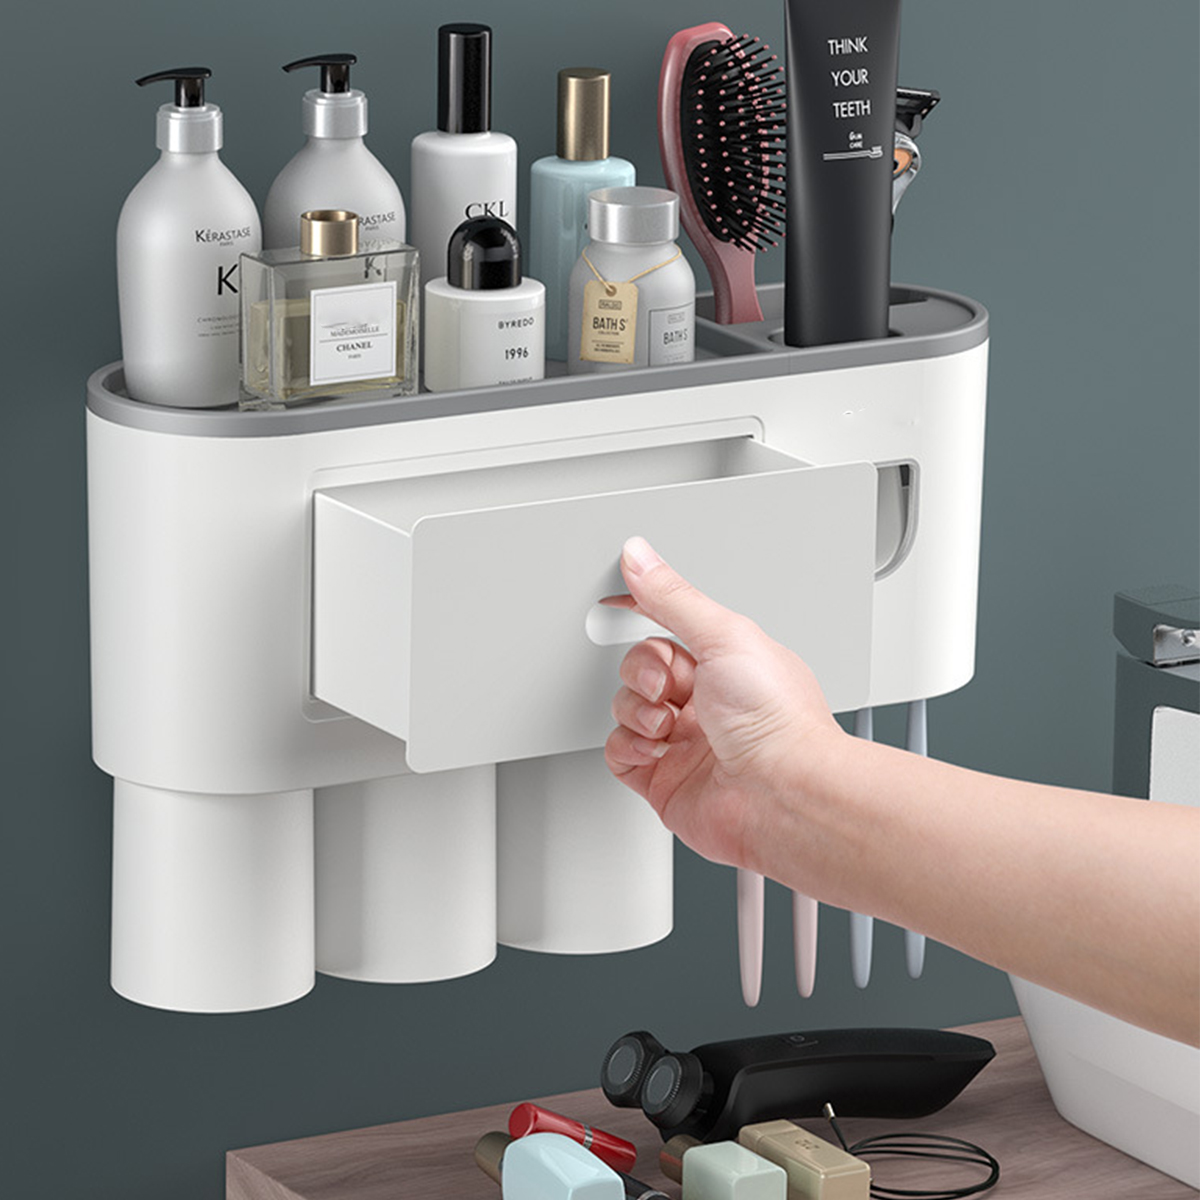 34-Cups-Magnetic-Toothbrush-Rack-Strong-Bearing-Automatic-Toothpaste-Squeezer-1769033-7